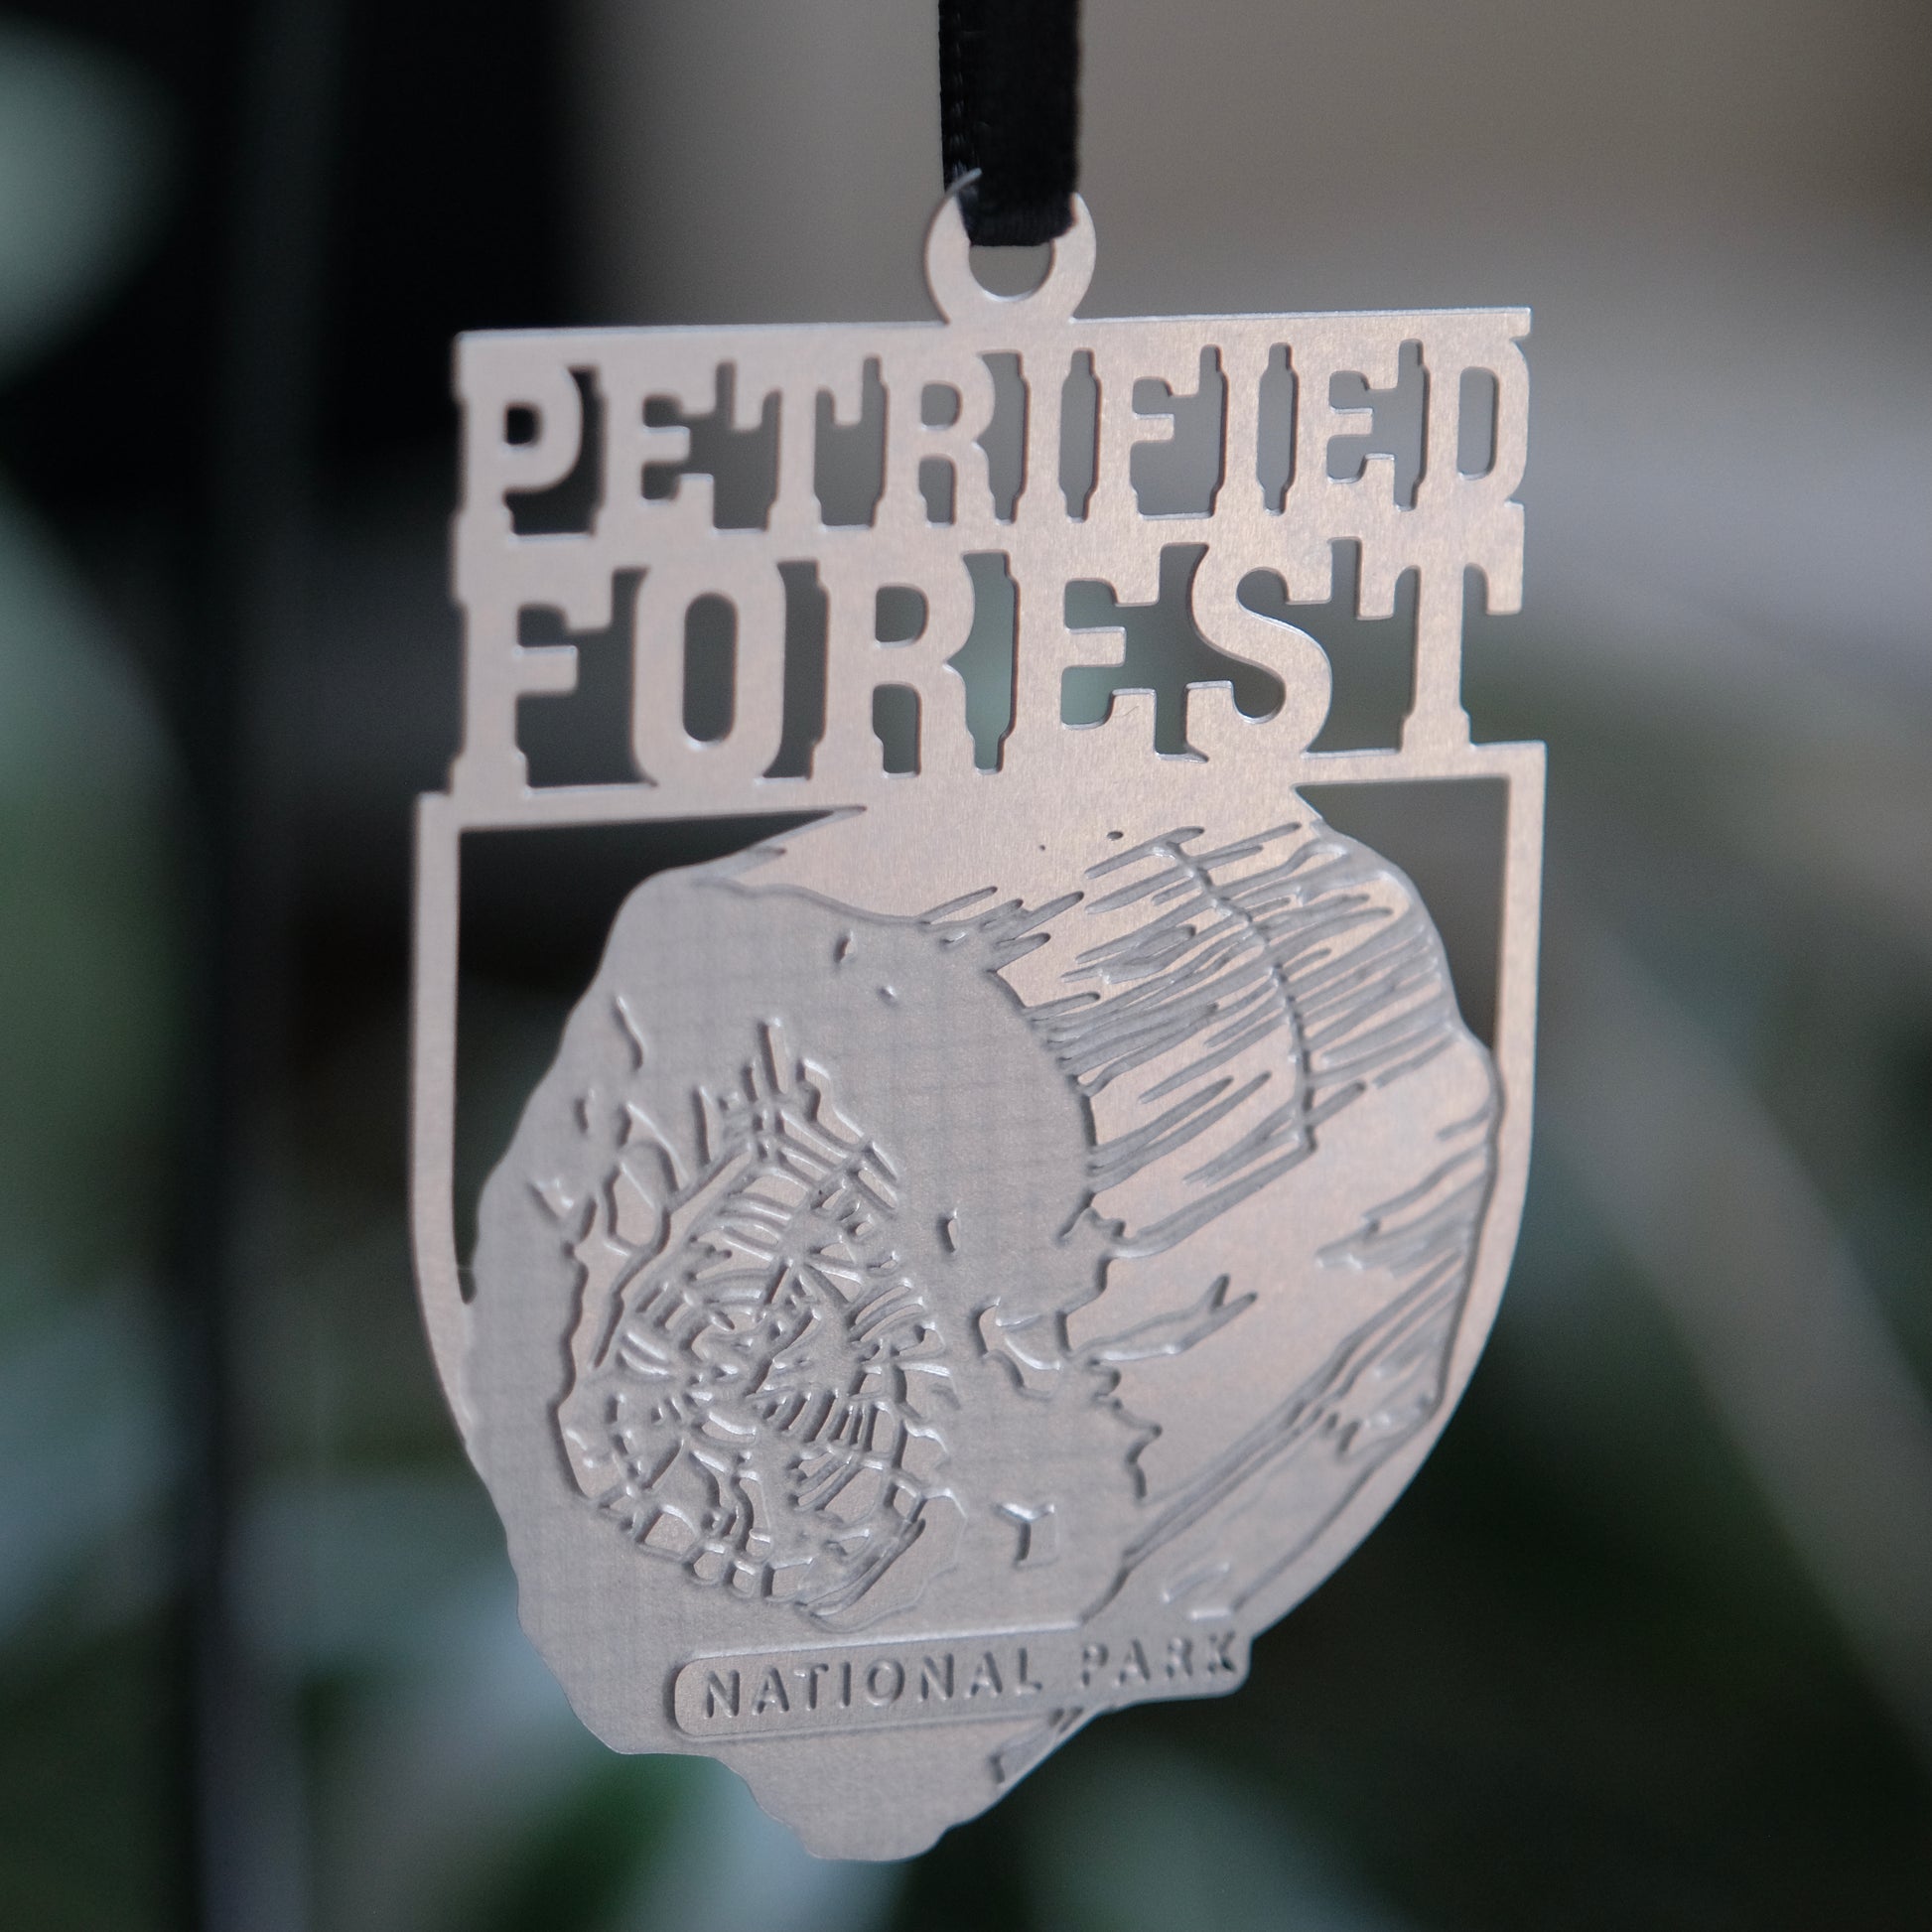 National Park Gift - Petrified Forest National Park Ornament